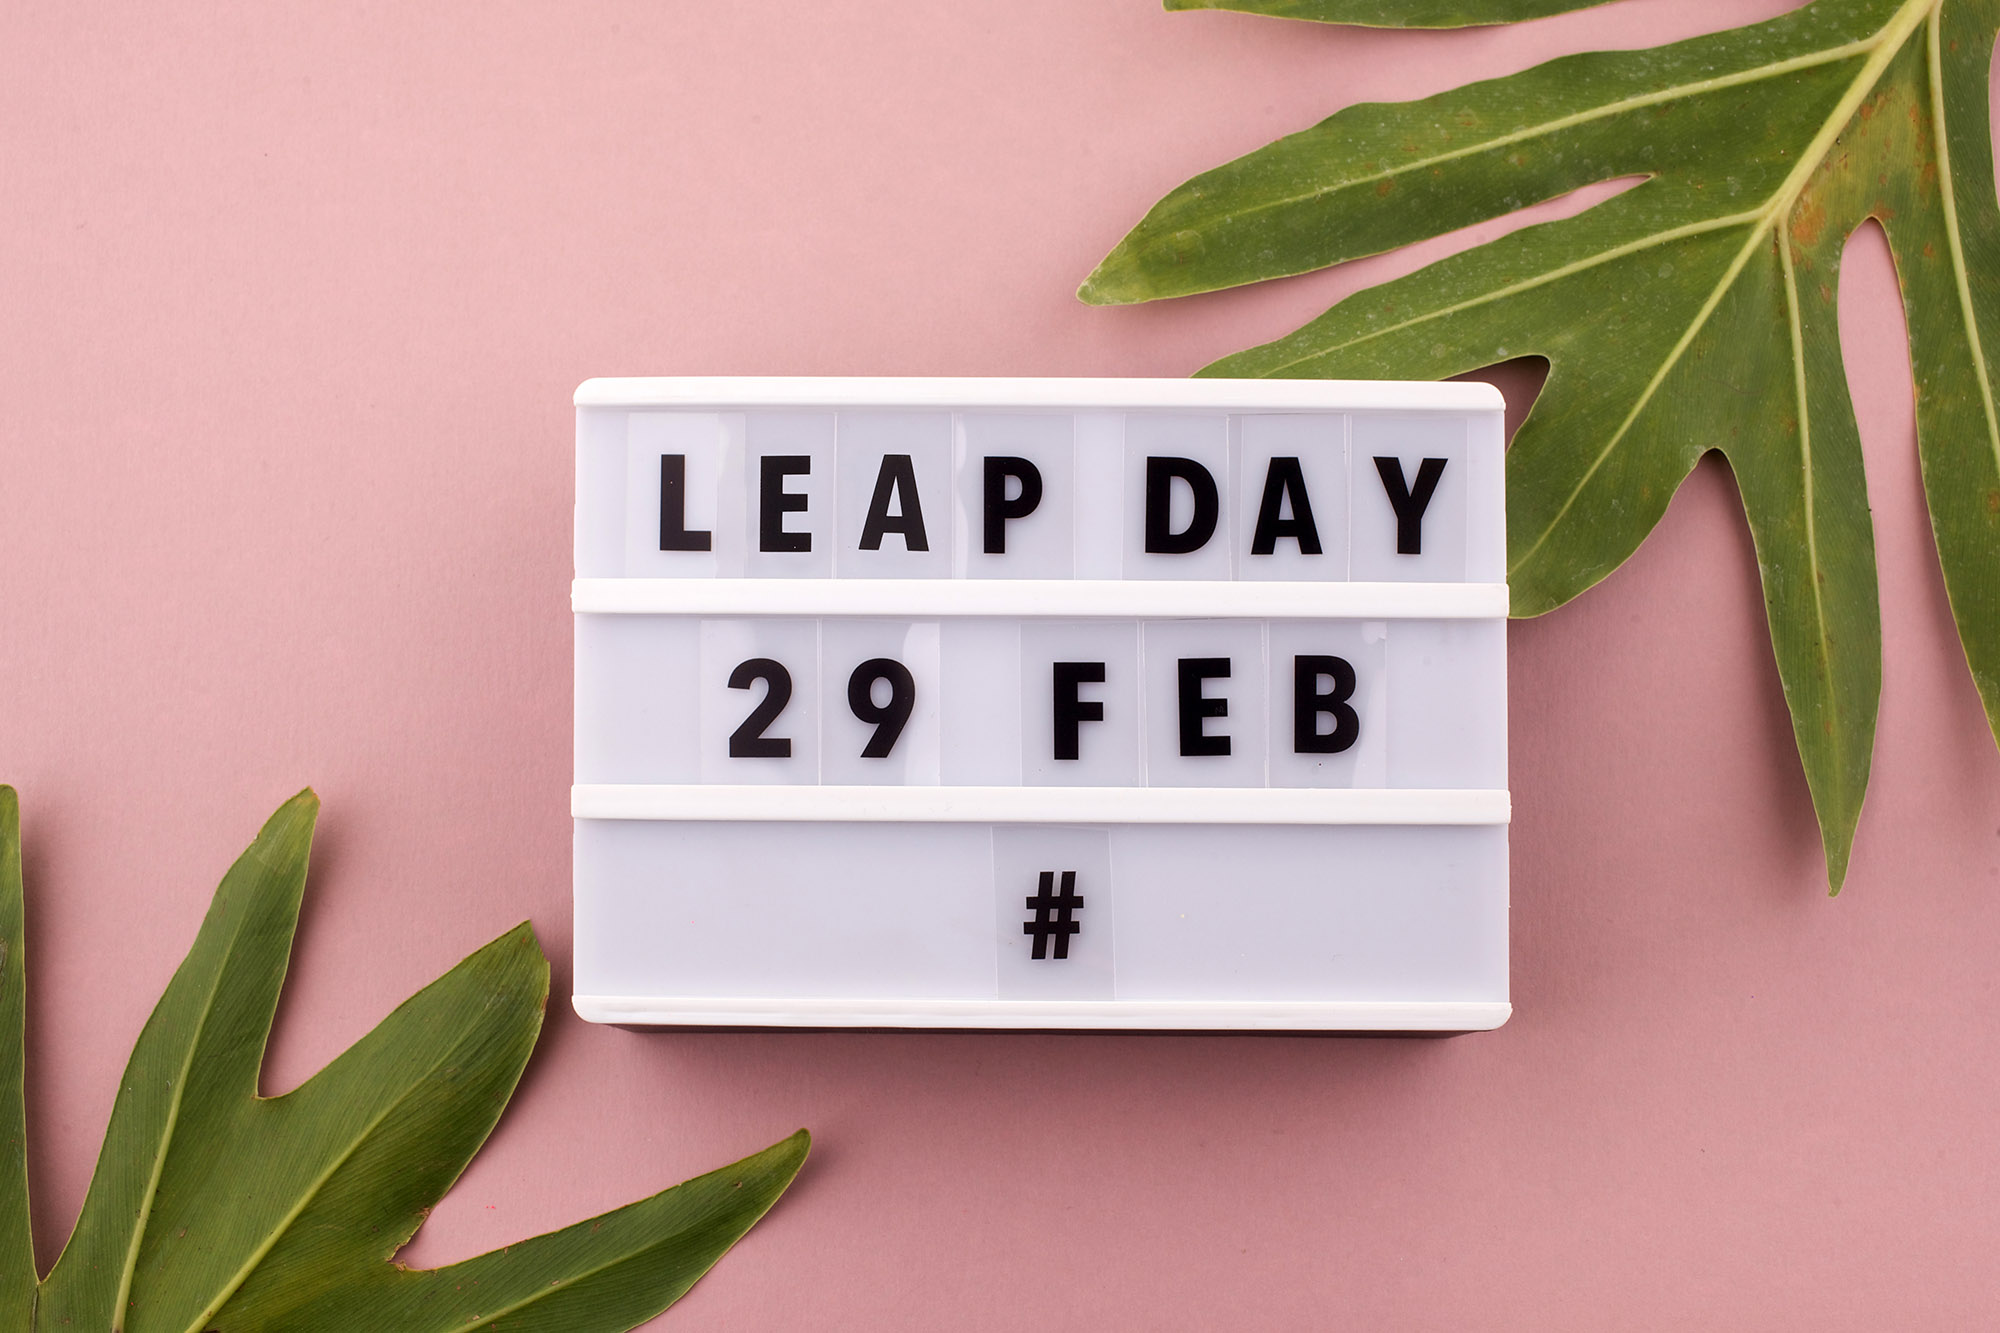 Local businesses are celebrating Leap Day with freebies and deals